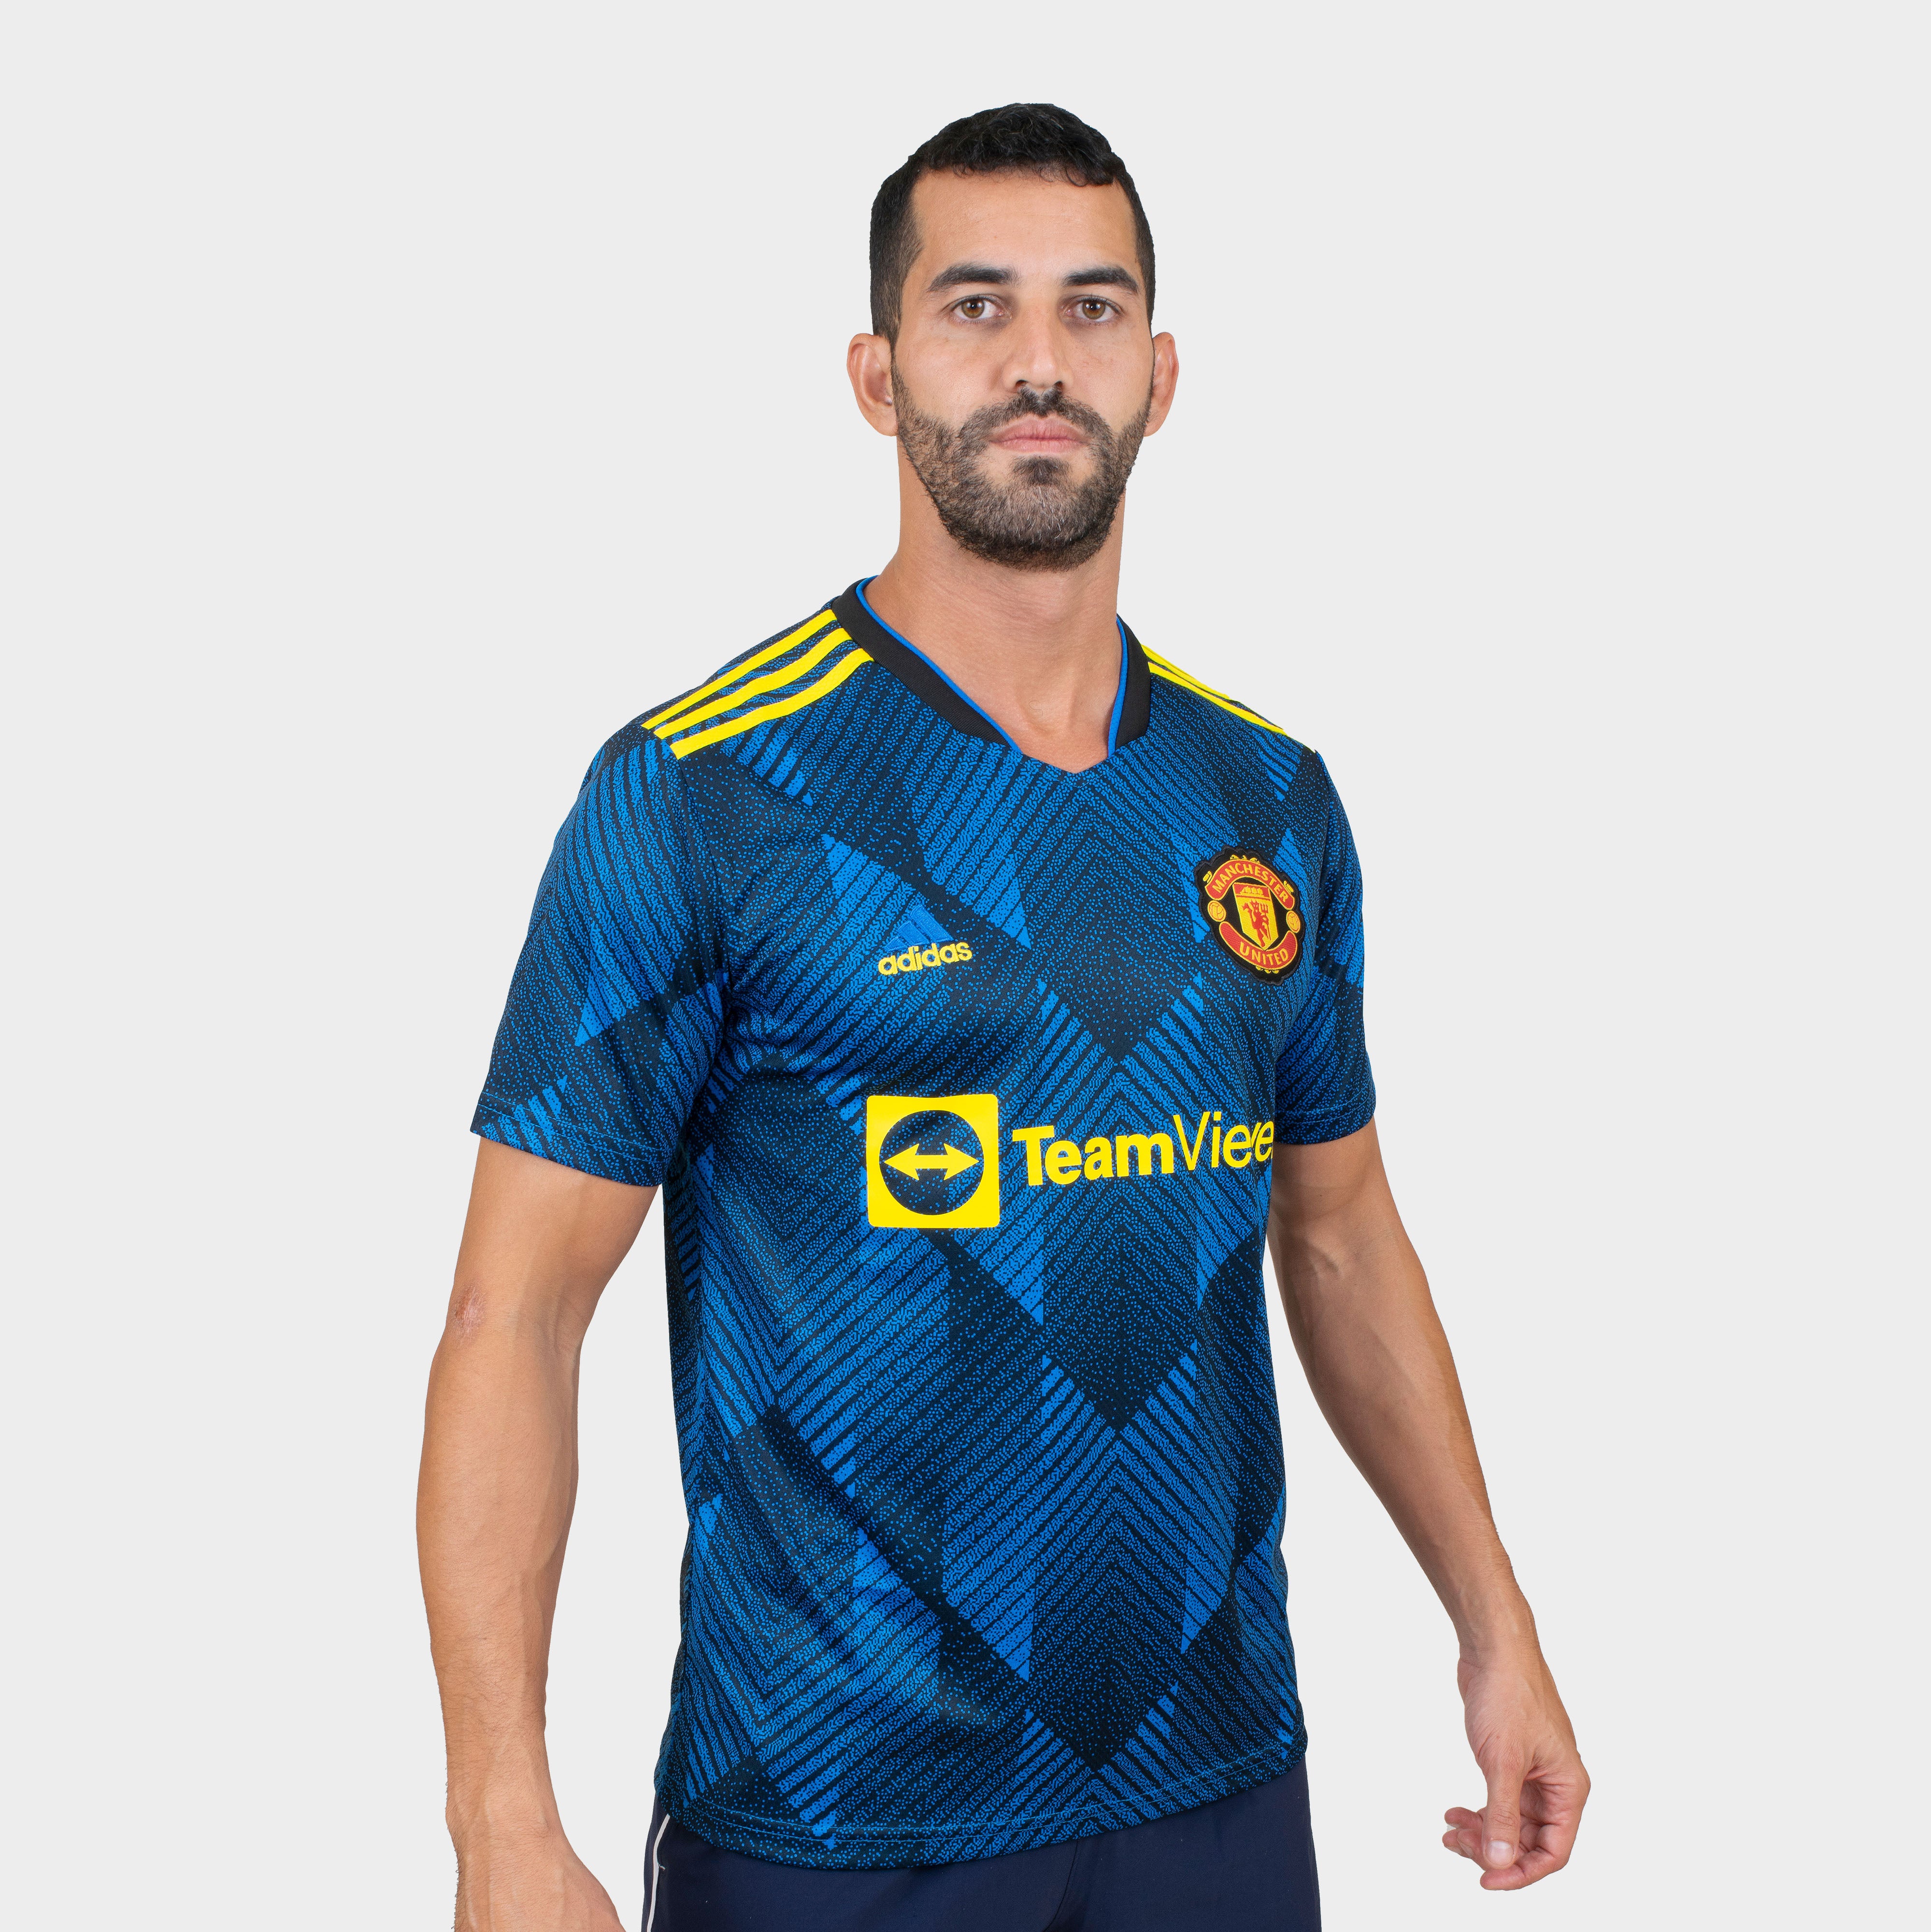 new manchester united jersey 21/22